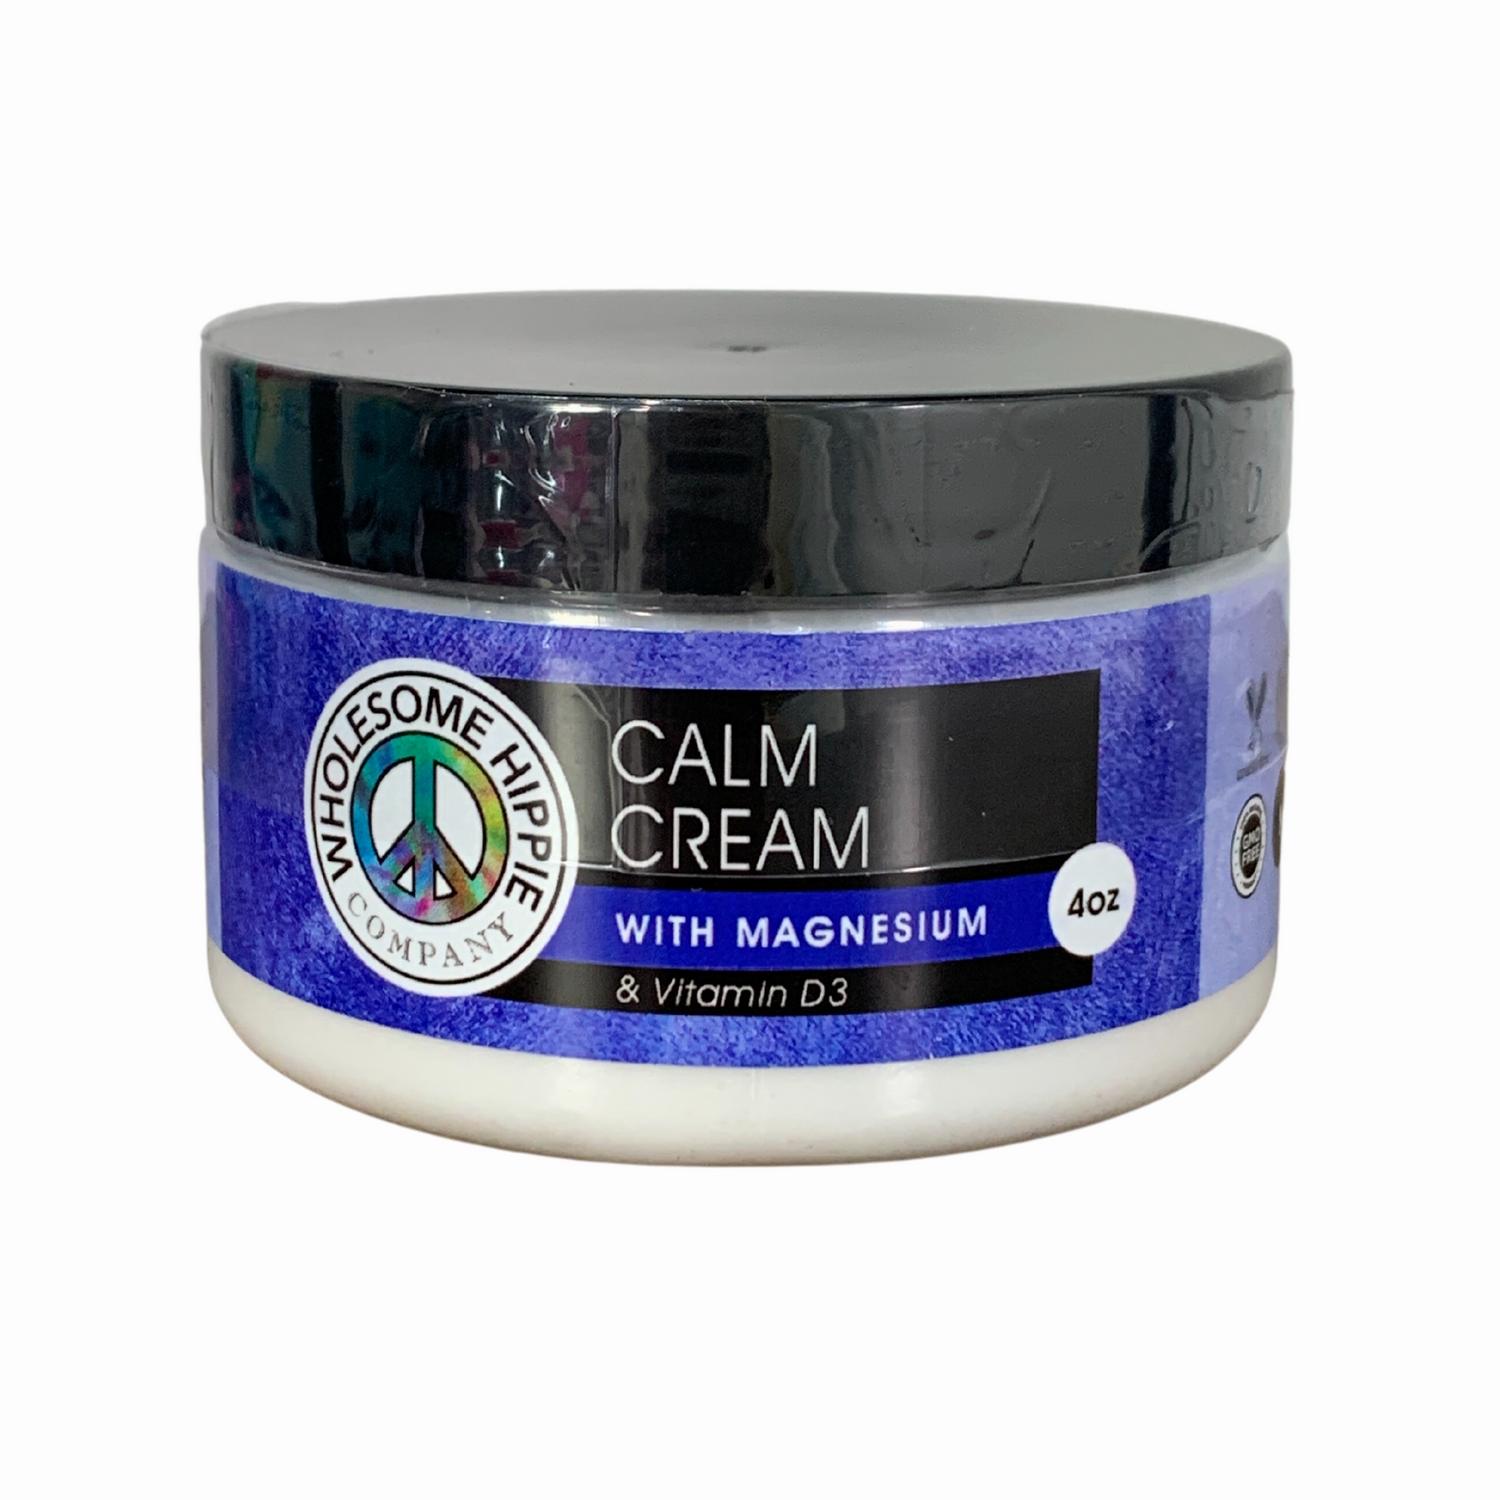 A black jar of Calm Cream with a purple label that says Calm Cream with Magnesium and Vitamin D3.